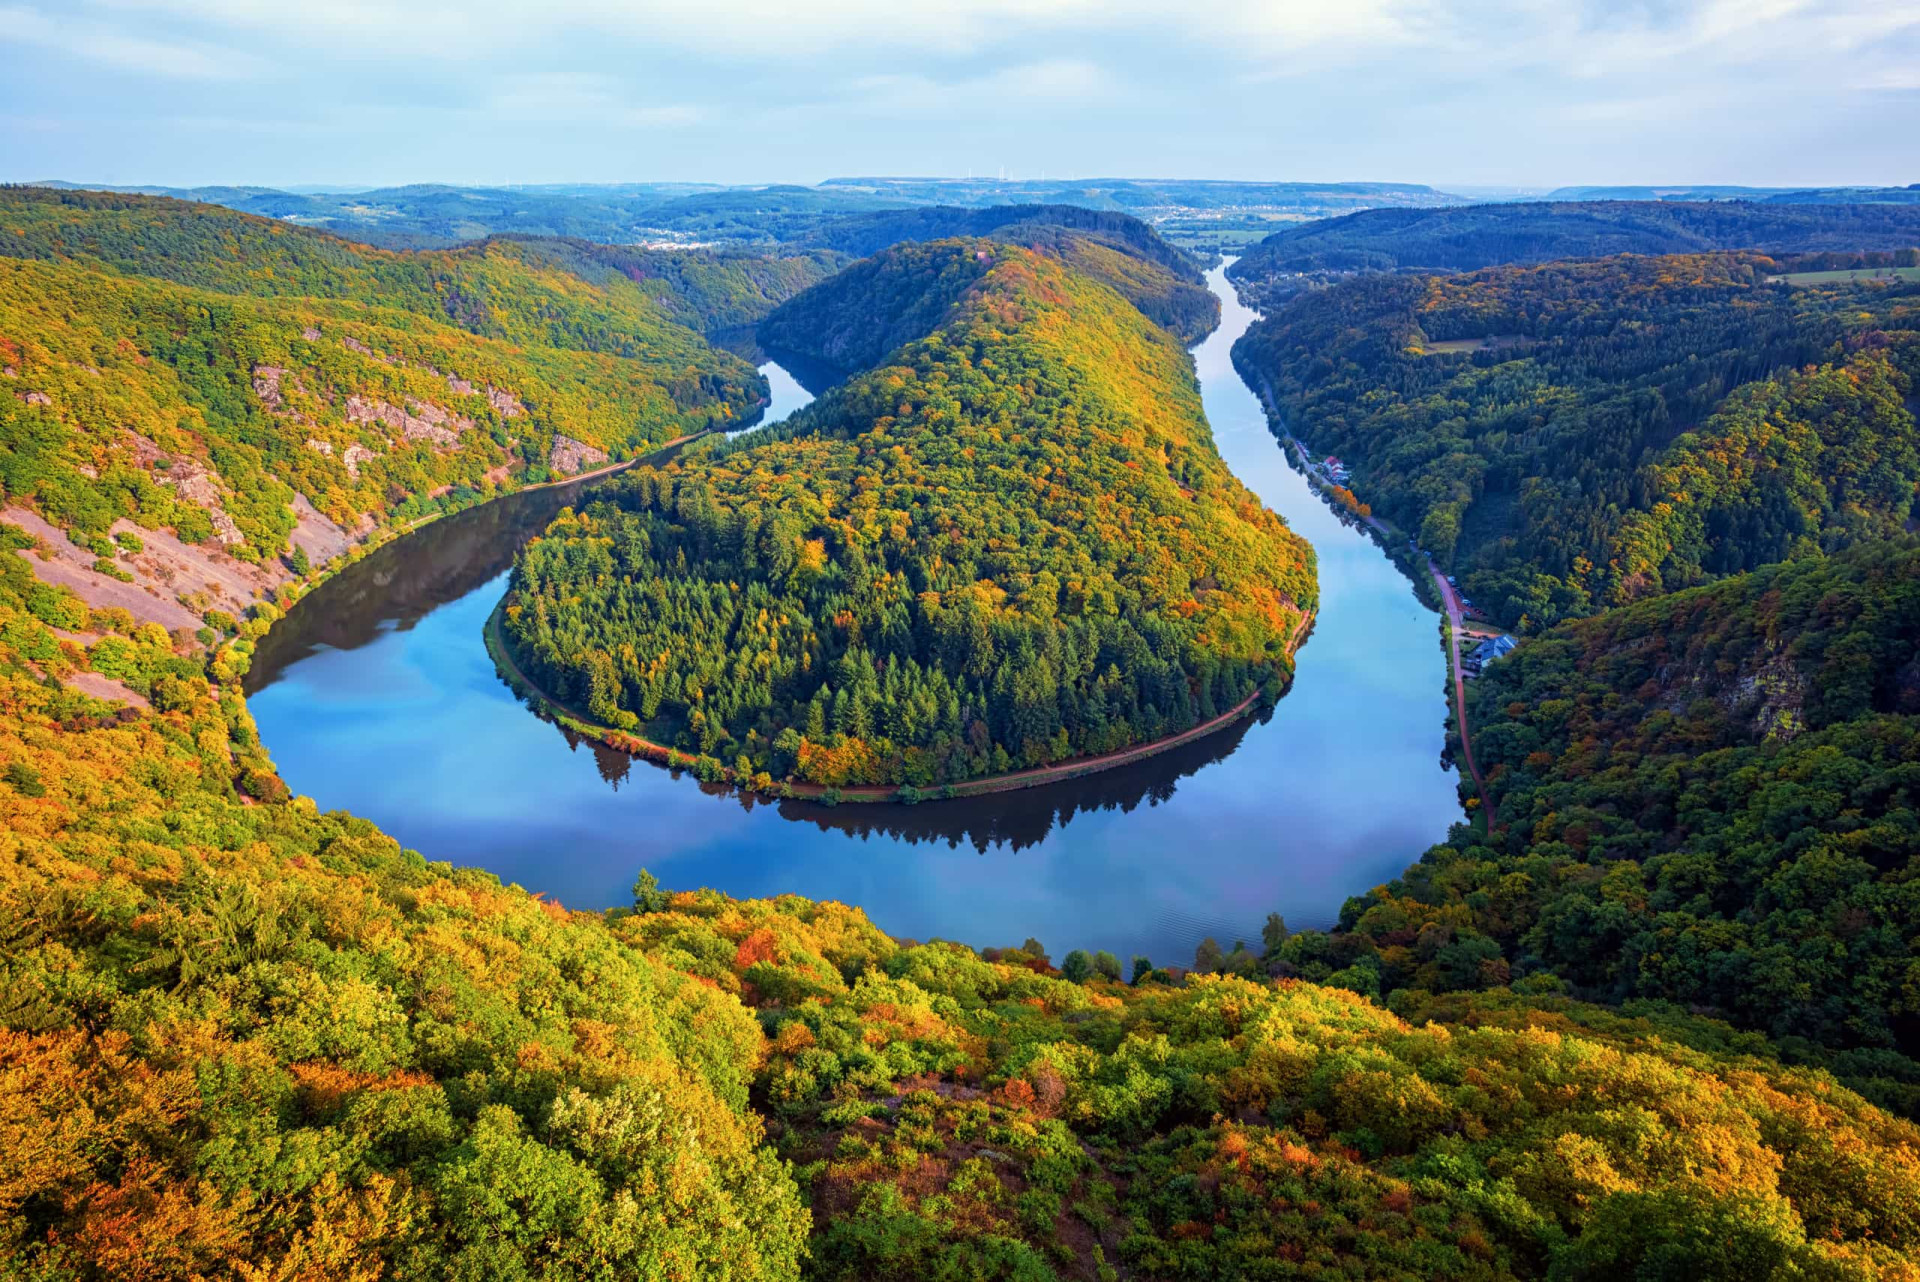 <p>The Saar <a href="https://www.starsinsider.com/travel/466663/exploring-europes-greatest-rivers" rel="noopener">River</a> pursues a winding course through the countryside of Saarland to create this outstanding natural feature, a hairpin 180-degree bend known as the "Saar Loop."</p><p>You may also like:<a href="https://www.starsinsider.com/n/405984?utm_source=msn.com&utm_medium=display&utm_campaign=referral_description&utm_content=481885v1en-us"> The stupidest excuses for war in history</a></p>